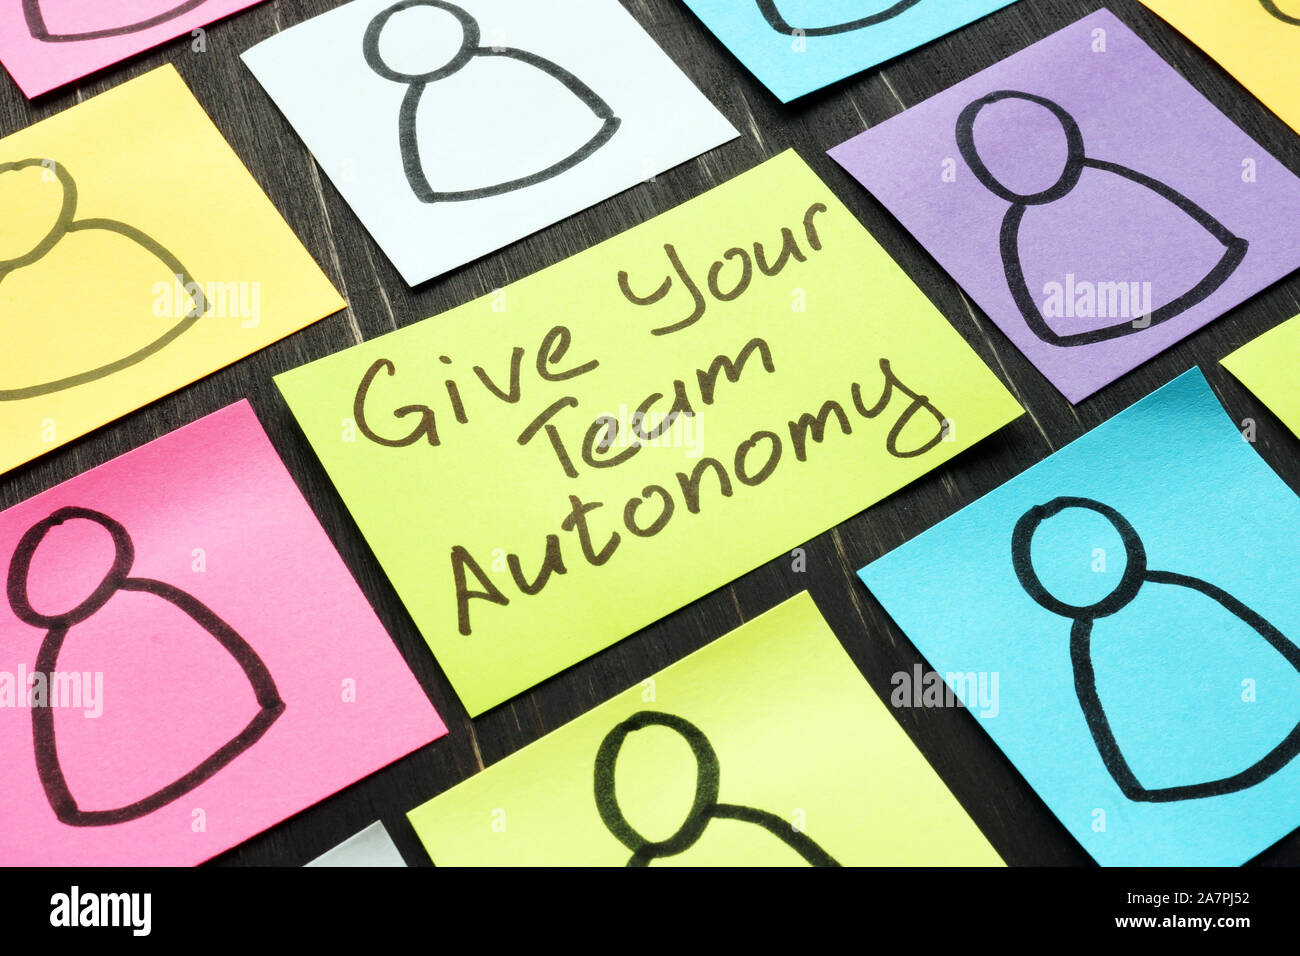 Give Your Team Autonomy sign and drawn smiles faces. Stock Photo